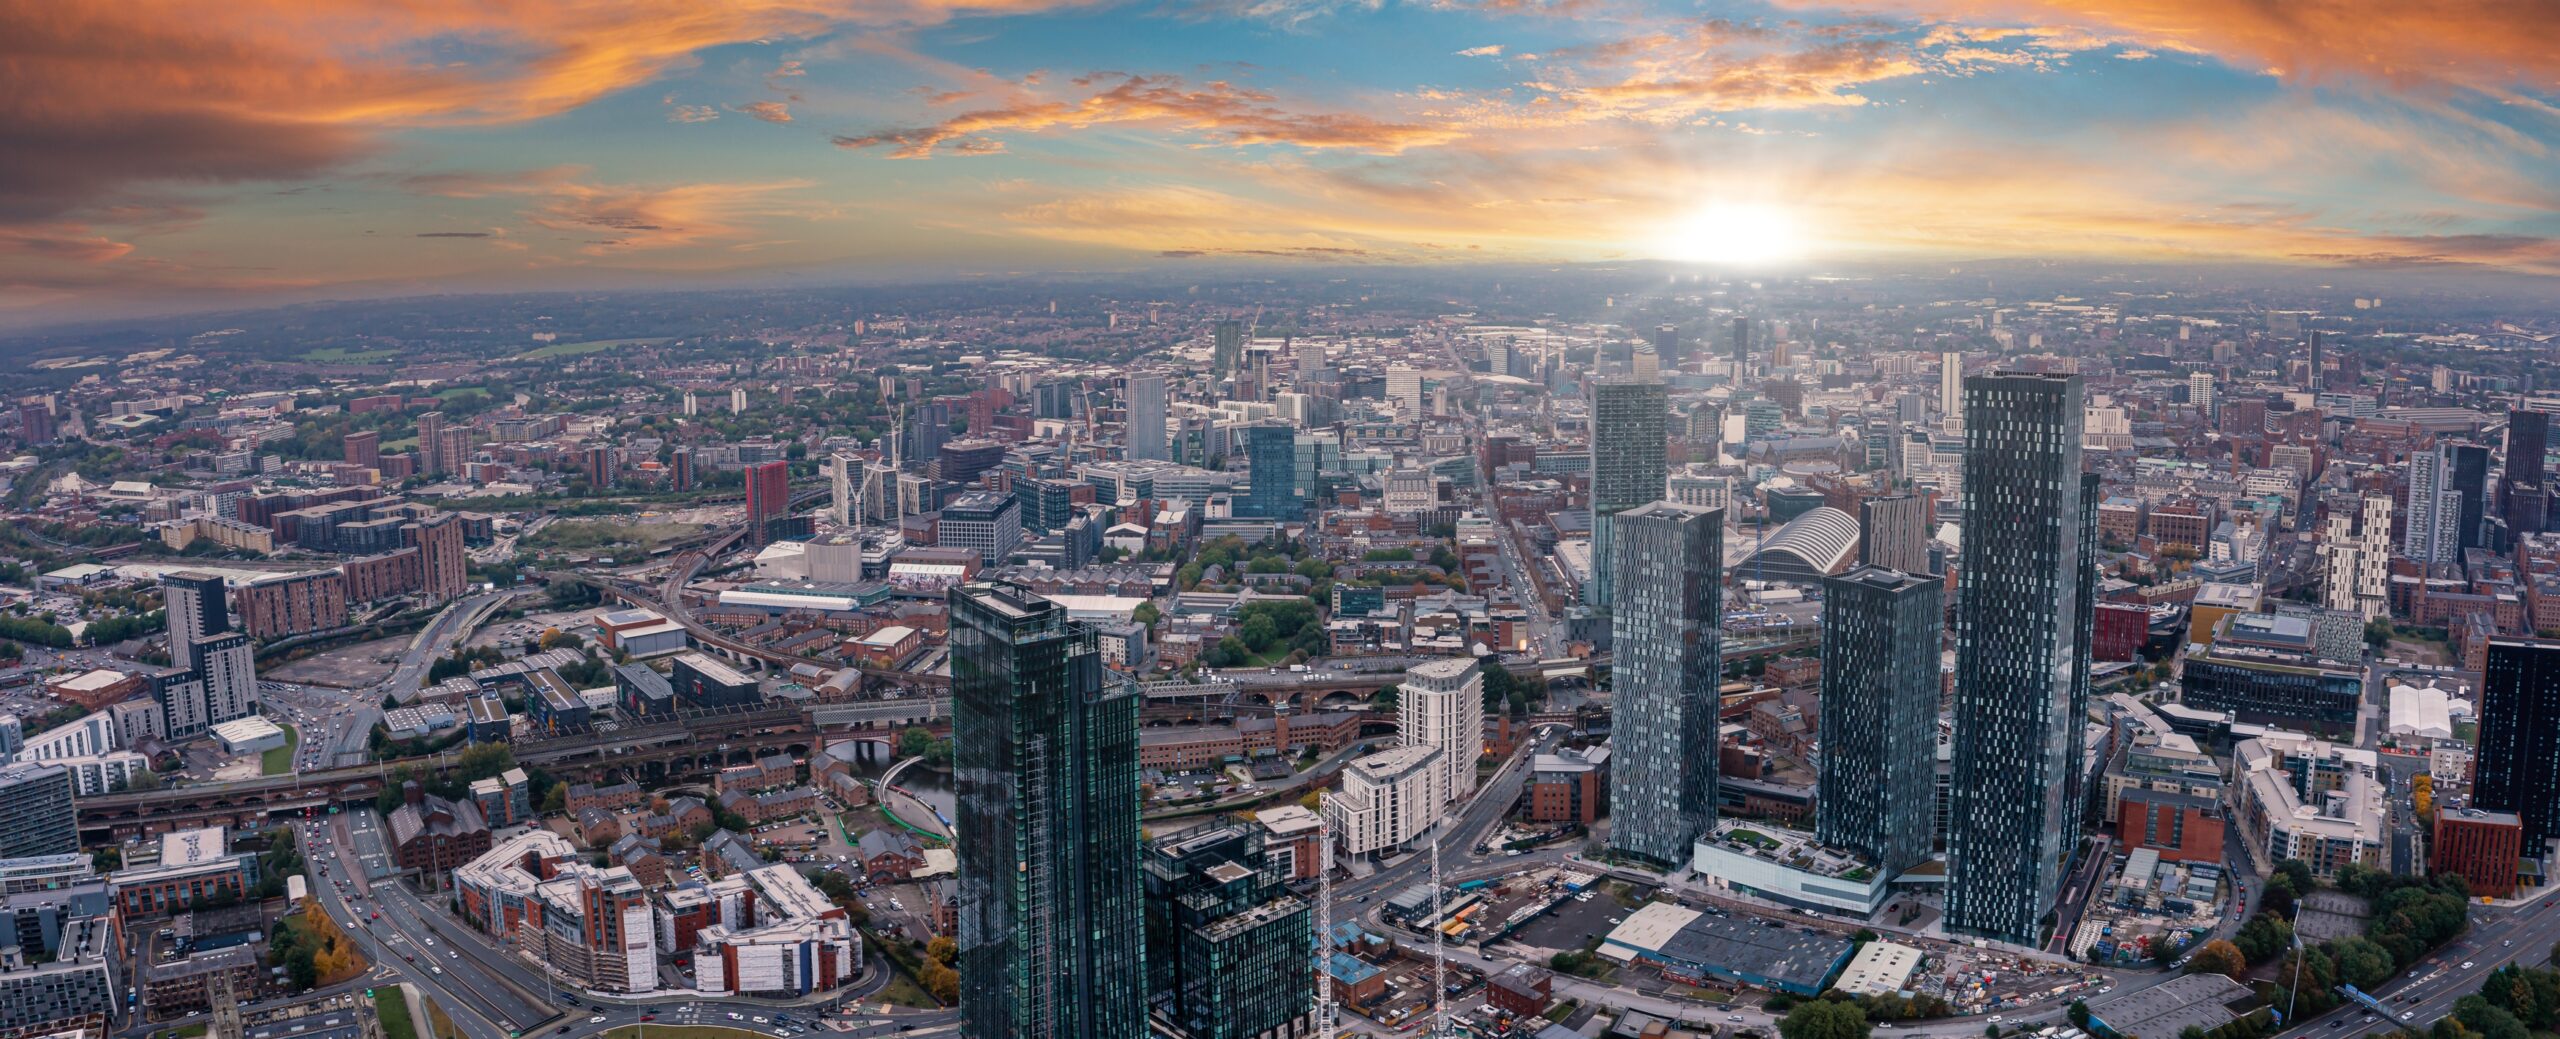 Manchester,,Uk.,August,10,,2021.,Aerial,View,Of,Manchester,City